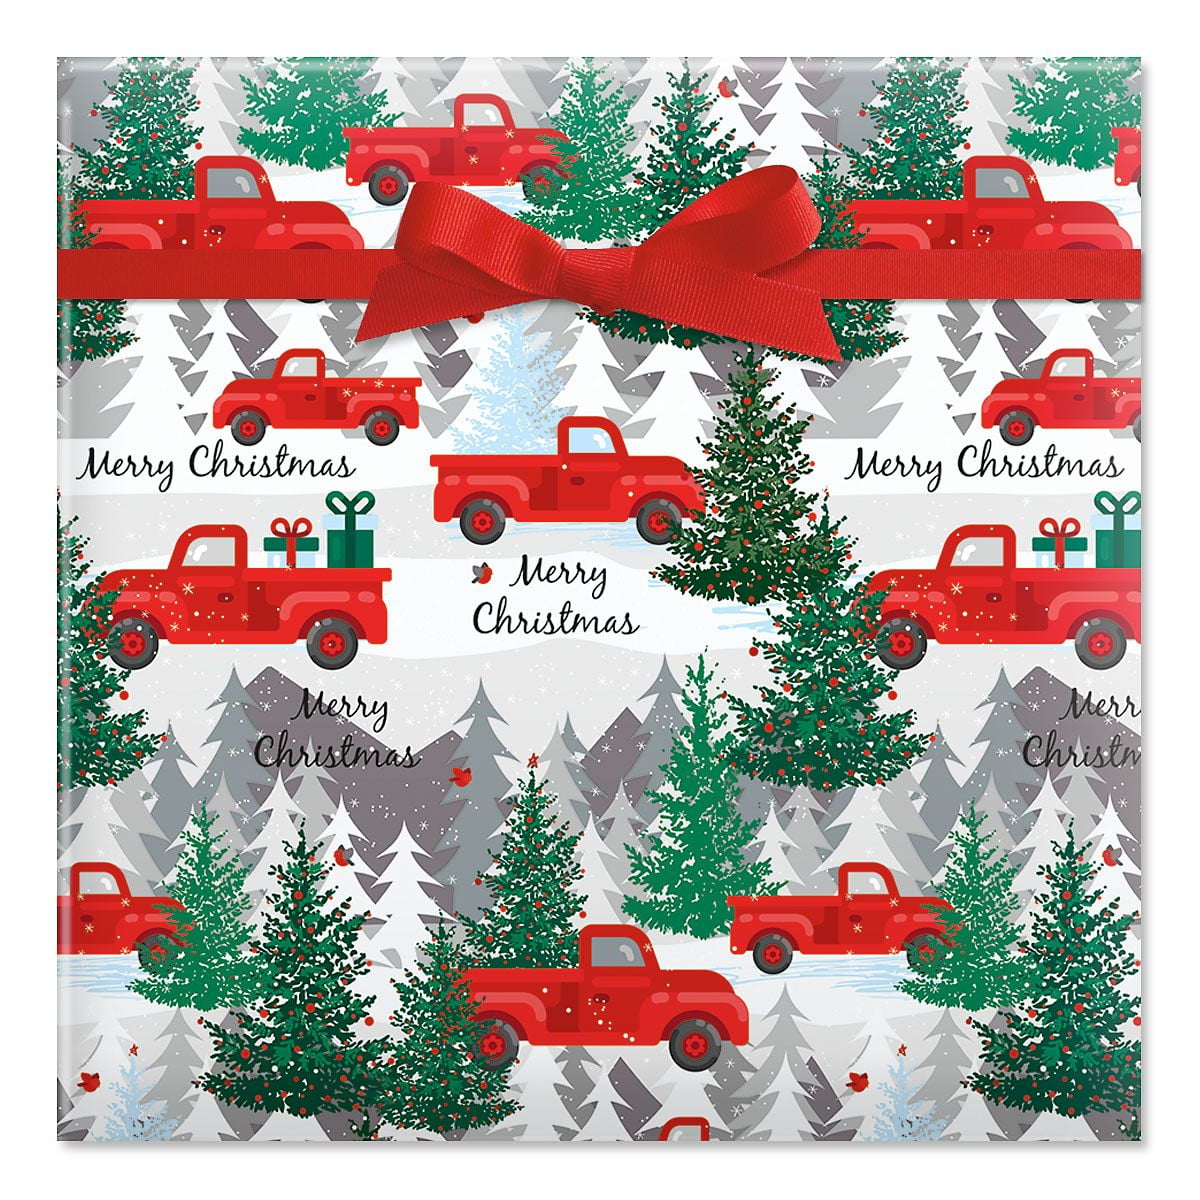 FNGZ Gift Wrapping Paper Clearance 1PC DIY Men's Women's Children's  Christmas Wrapping Paper Holiday Gifts Wrapping Truck Plaid Snowflake Green  Tree